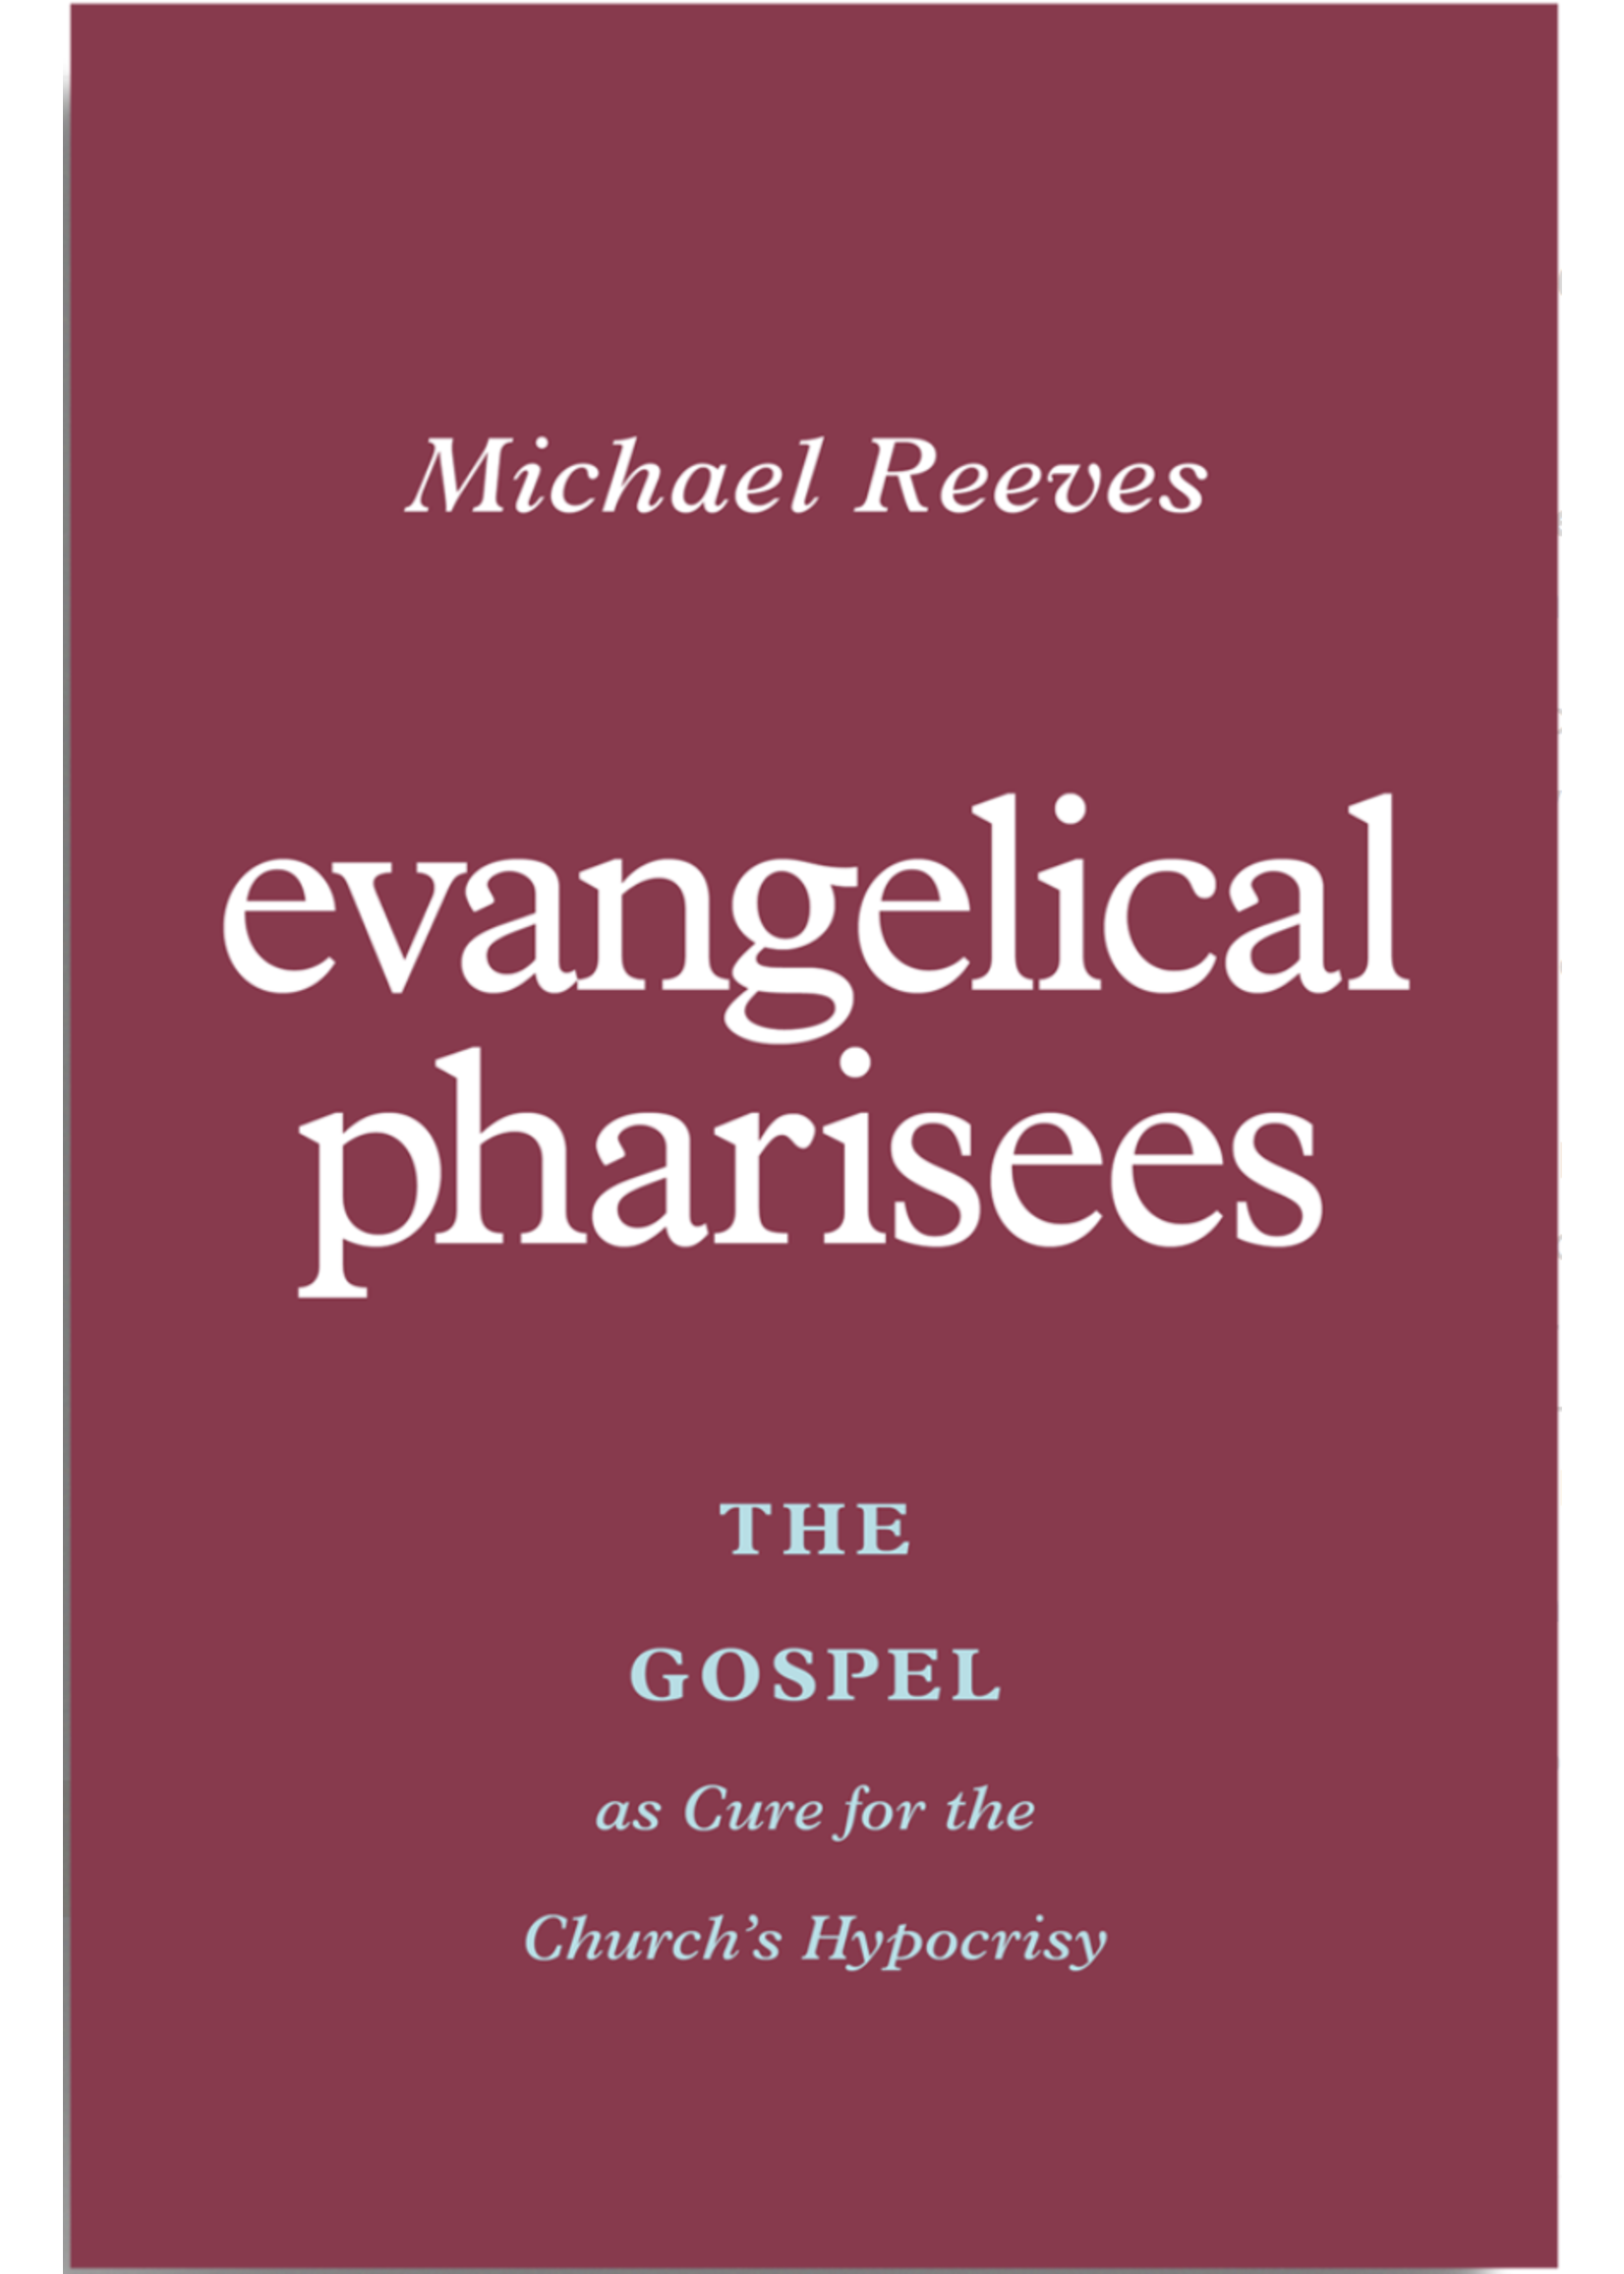 Reeves, Michael Evangelical Pharisees: The Gospel as Cure for the Church's Hypocrisy [Michael Reeves]